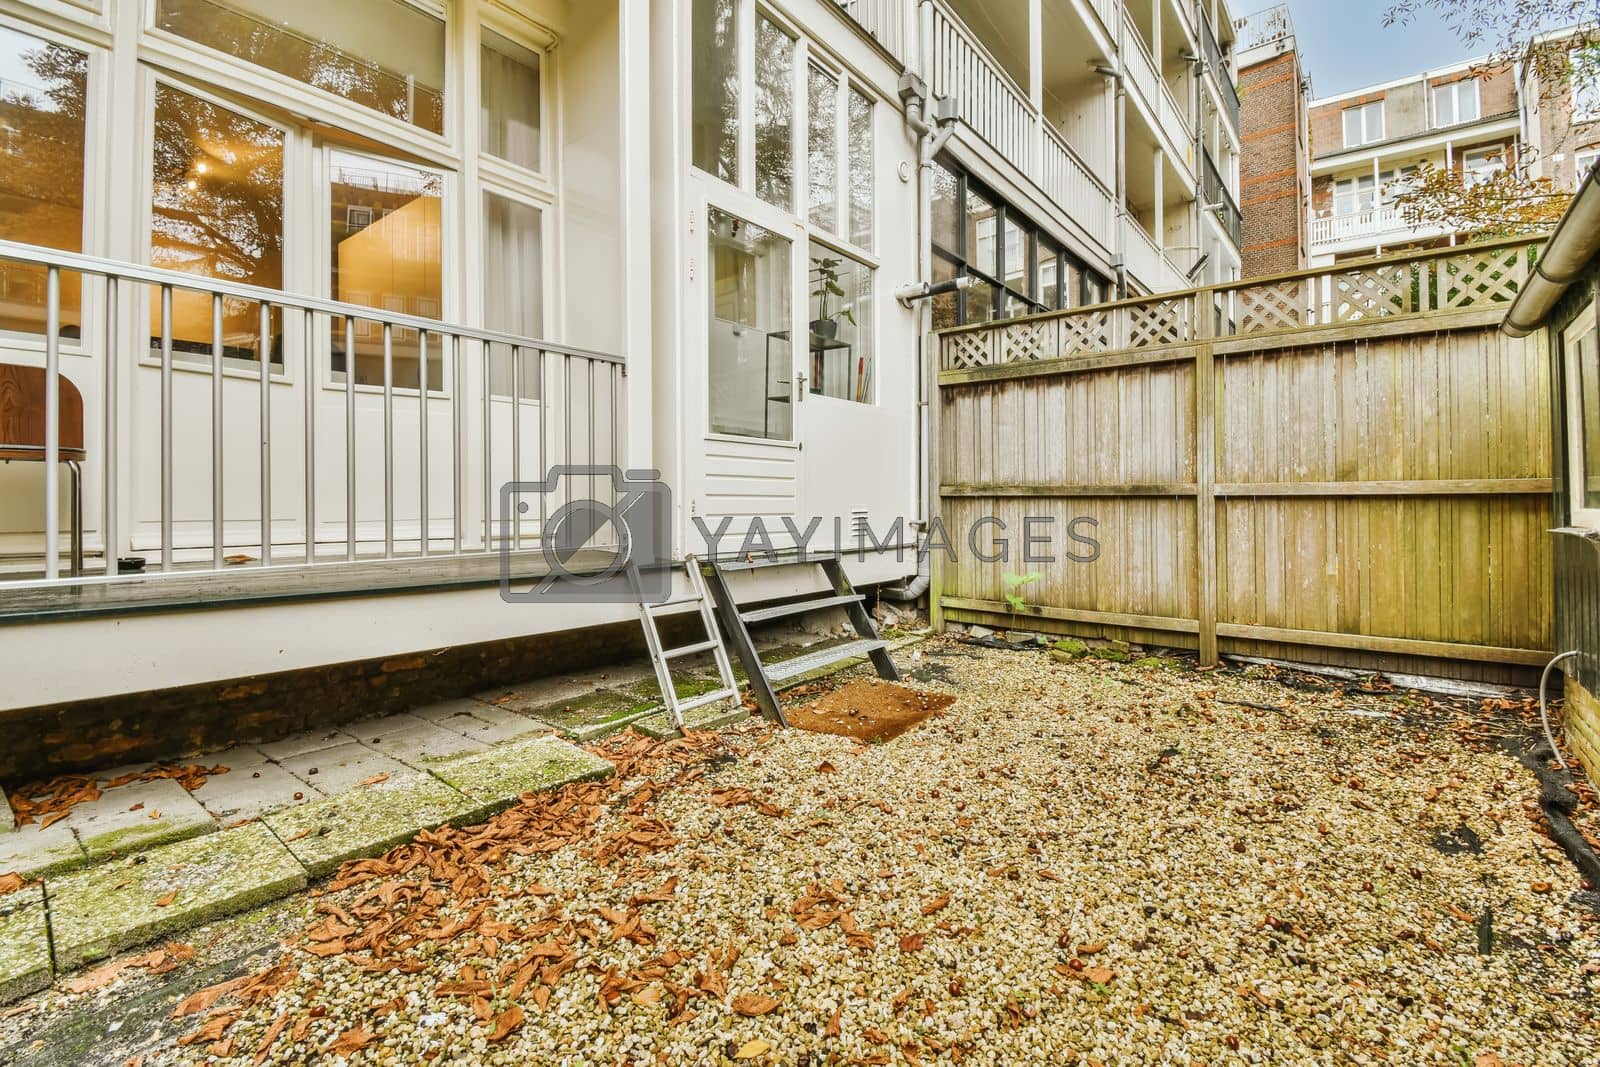 Royalty free image of the back yard of a house with a wooden fence by casamedia